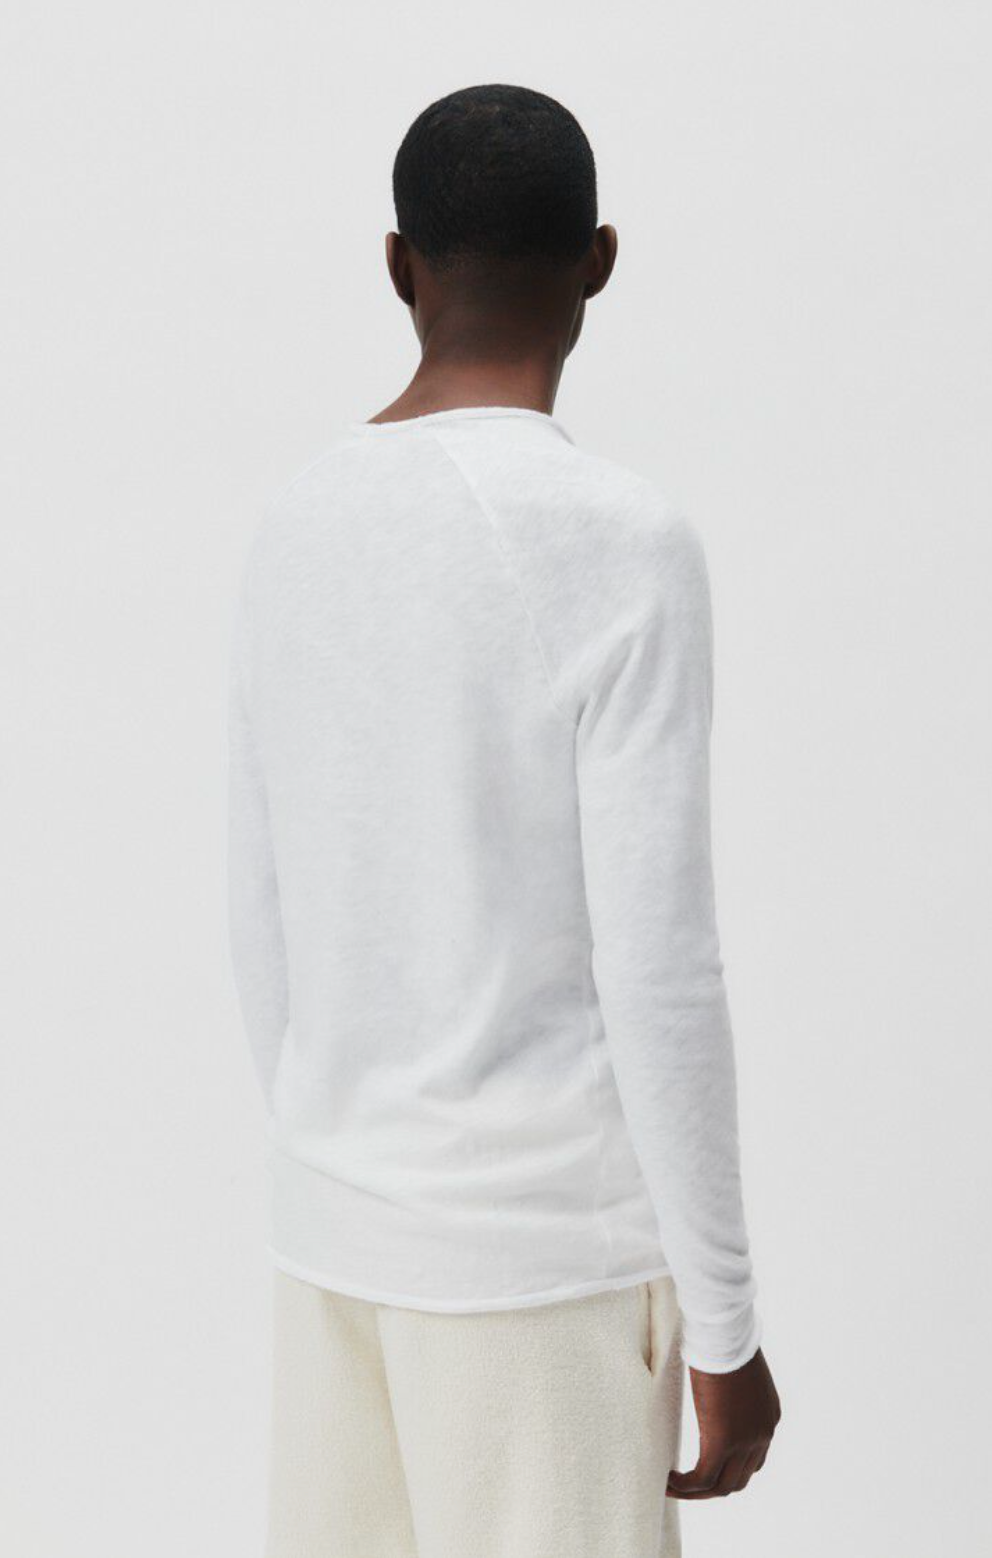 A medium close image showing the backside of a male model standing at an angle wearing the Sonoma Long Sleeve in white